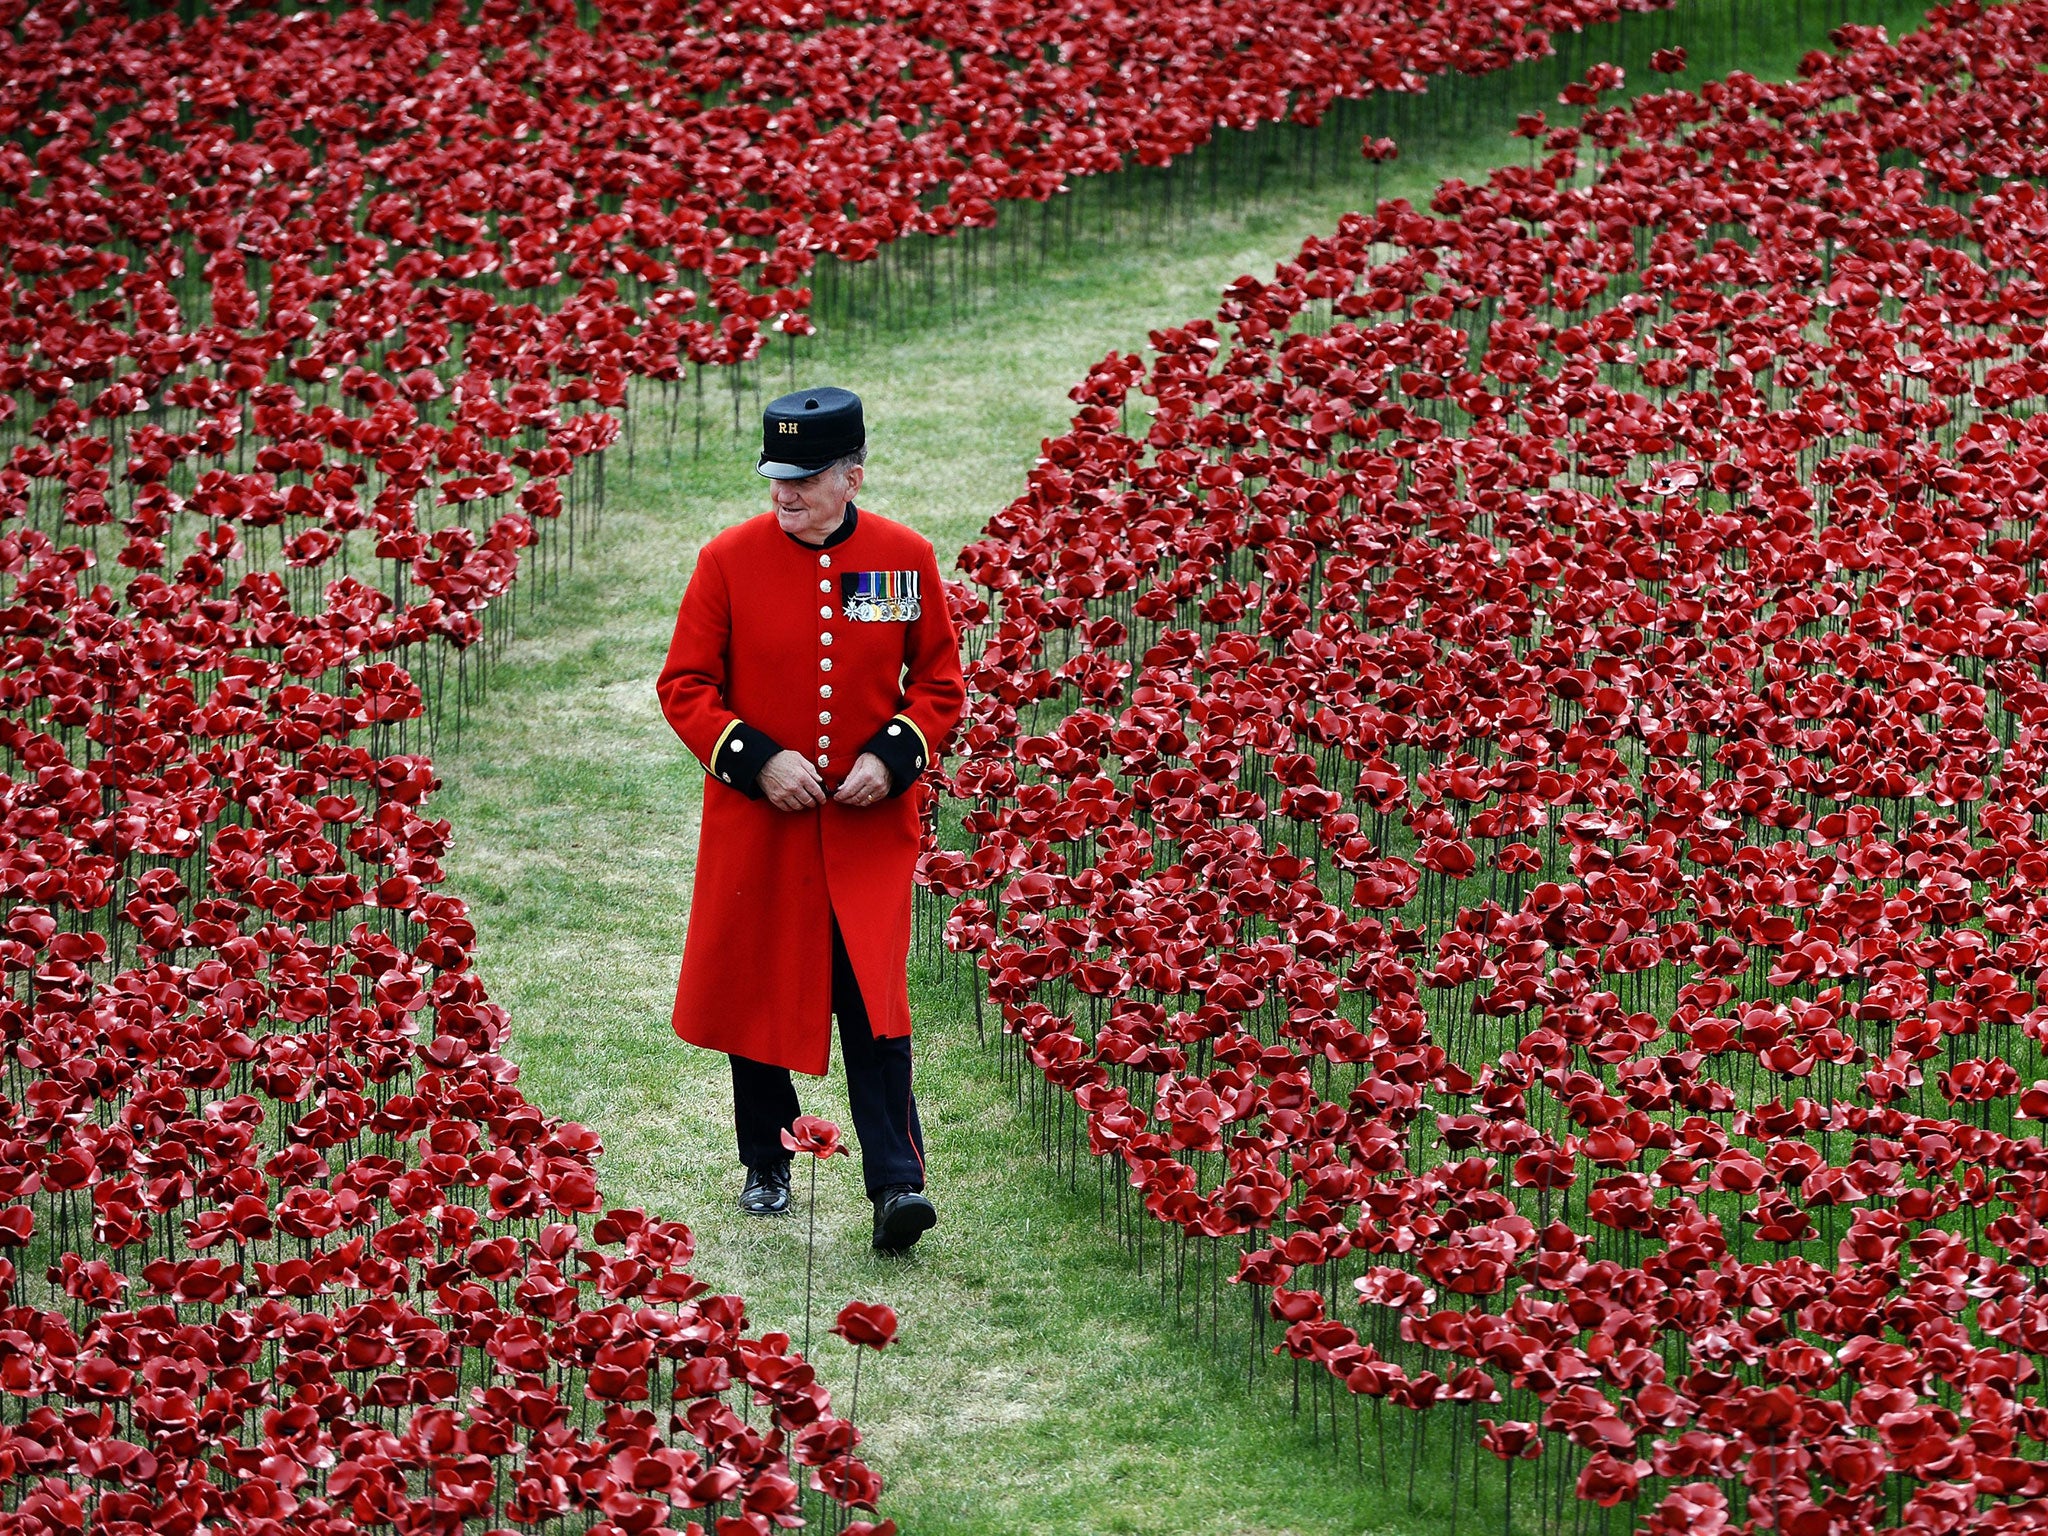 A Chelsea Pensioner walks among red poppies at the Tower of London’s moat yesterday